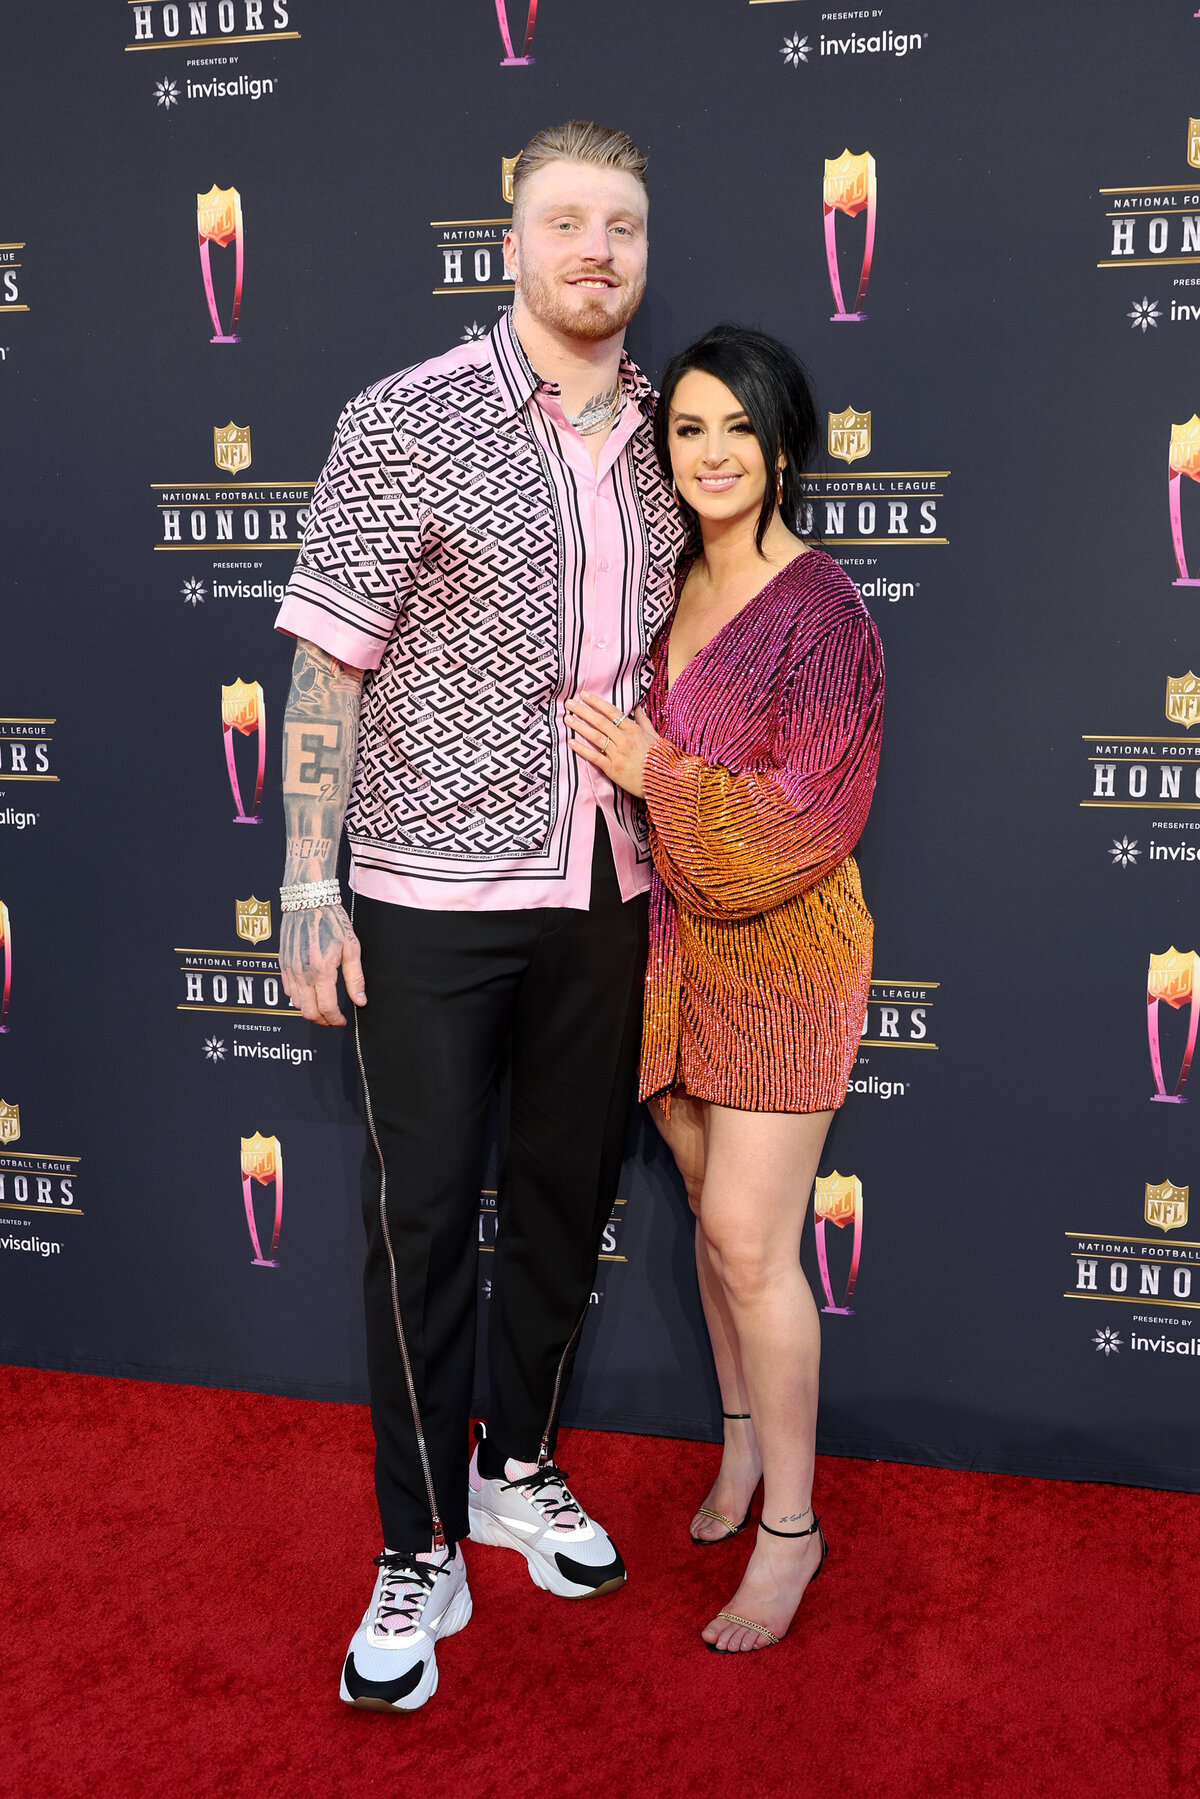 style-red-carpet-nfl-honors-maxx-crosby-nfl-player-raiders-personal-shopping-fashion-stylist-raina-silberstein